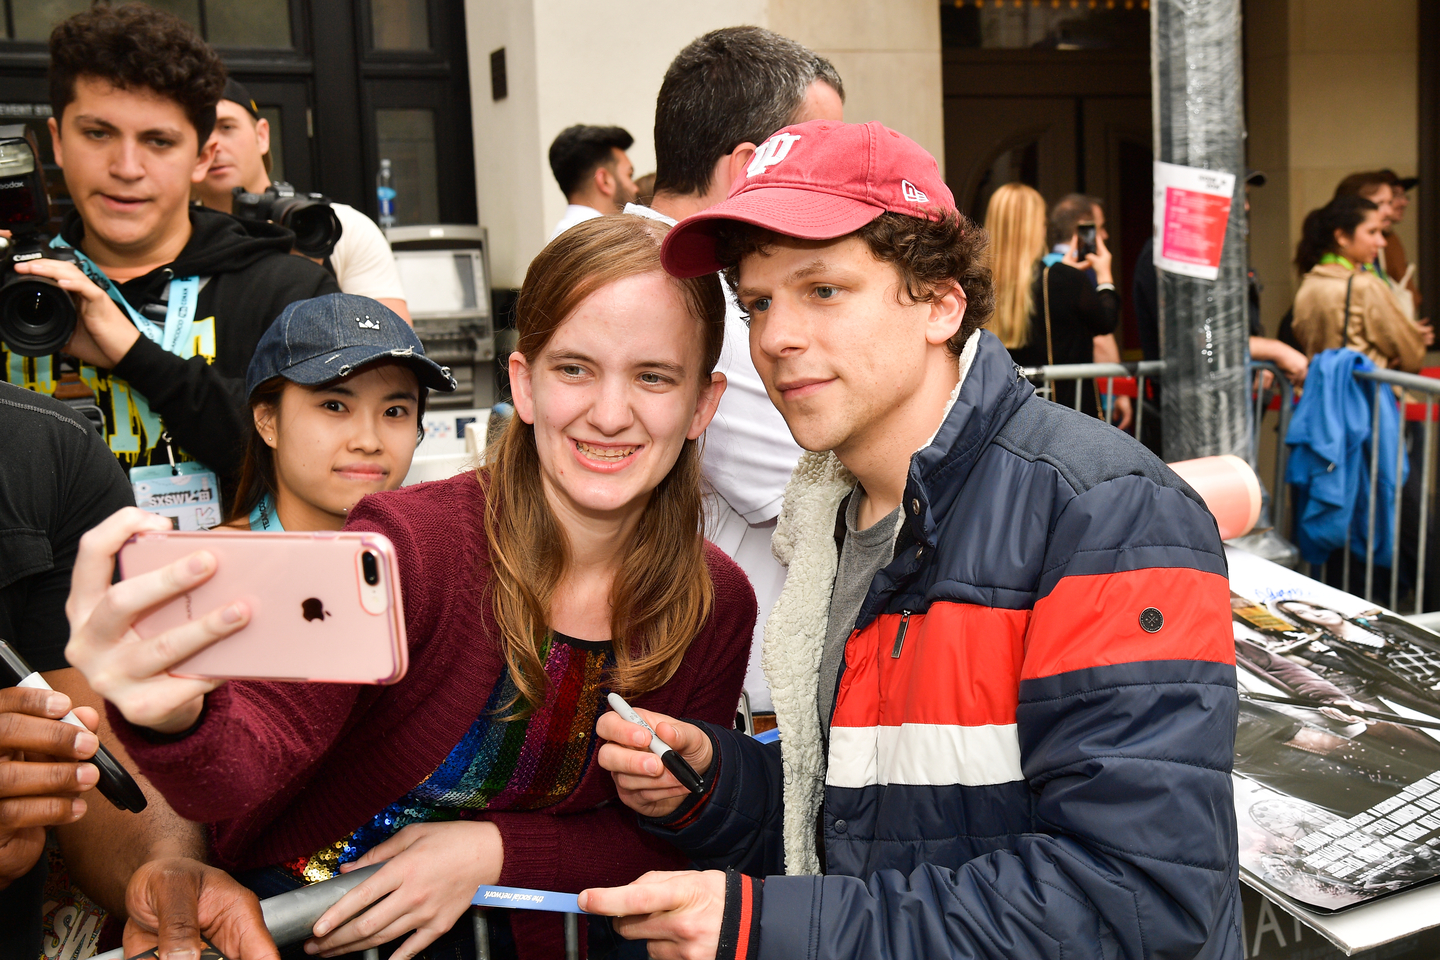 Jesse Eisenberg poses with a fan at The Art Of Self-Defense World Premiere – Photo by Matt Winkelmeyer/Getty Images for SXSW